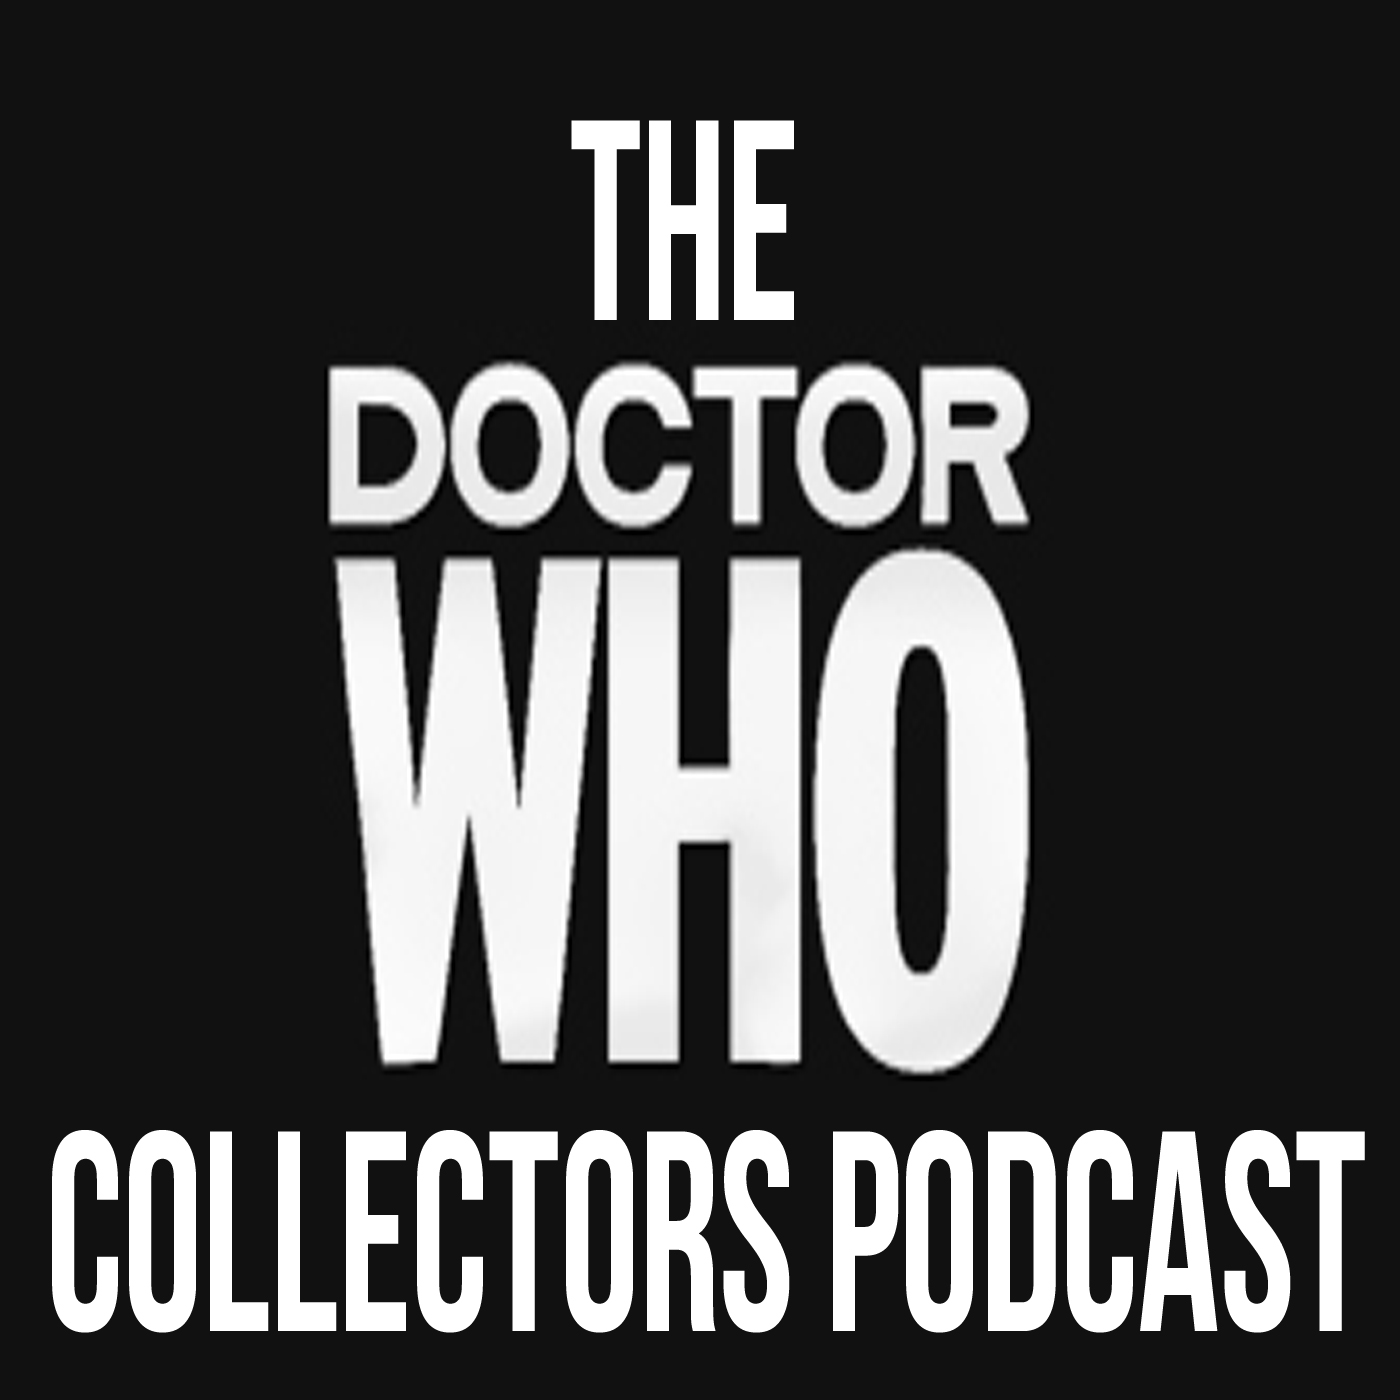 Thumbnail for Episode 40: Classic Dr. Who Hardcovers Year 3 (1976) with Tony Whitt